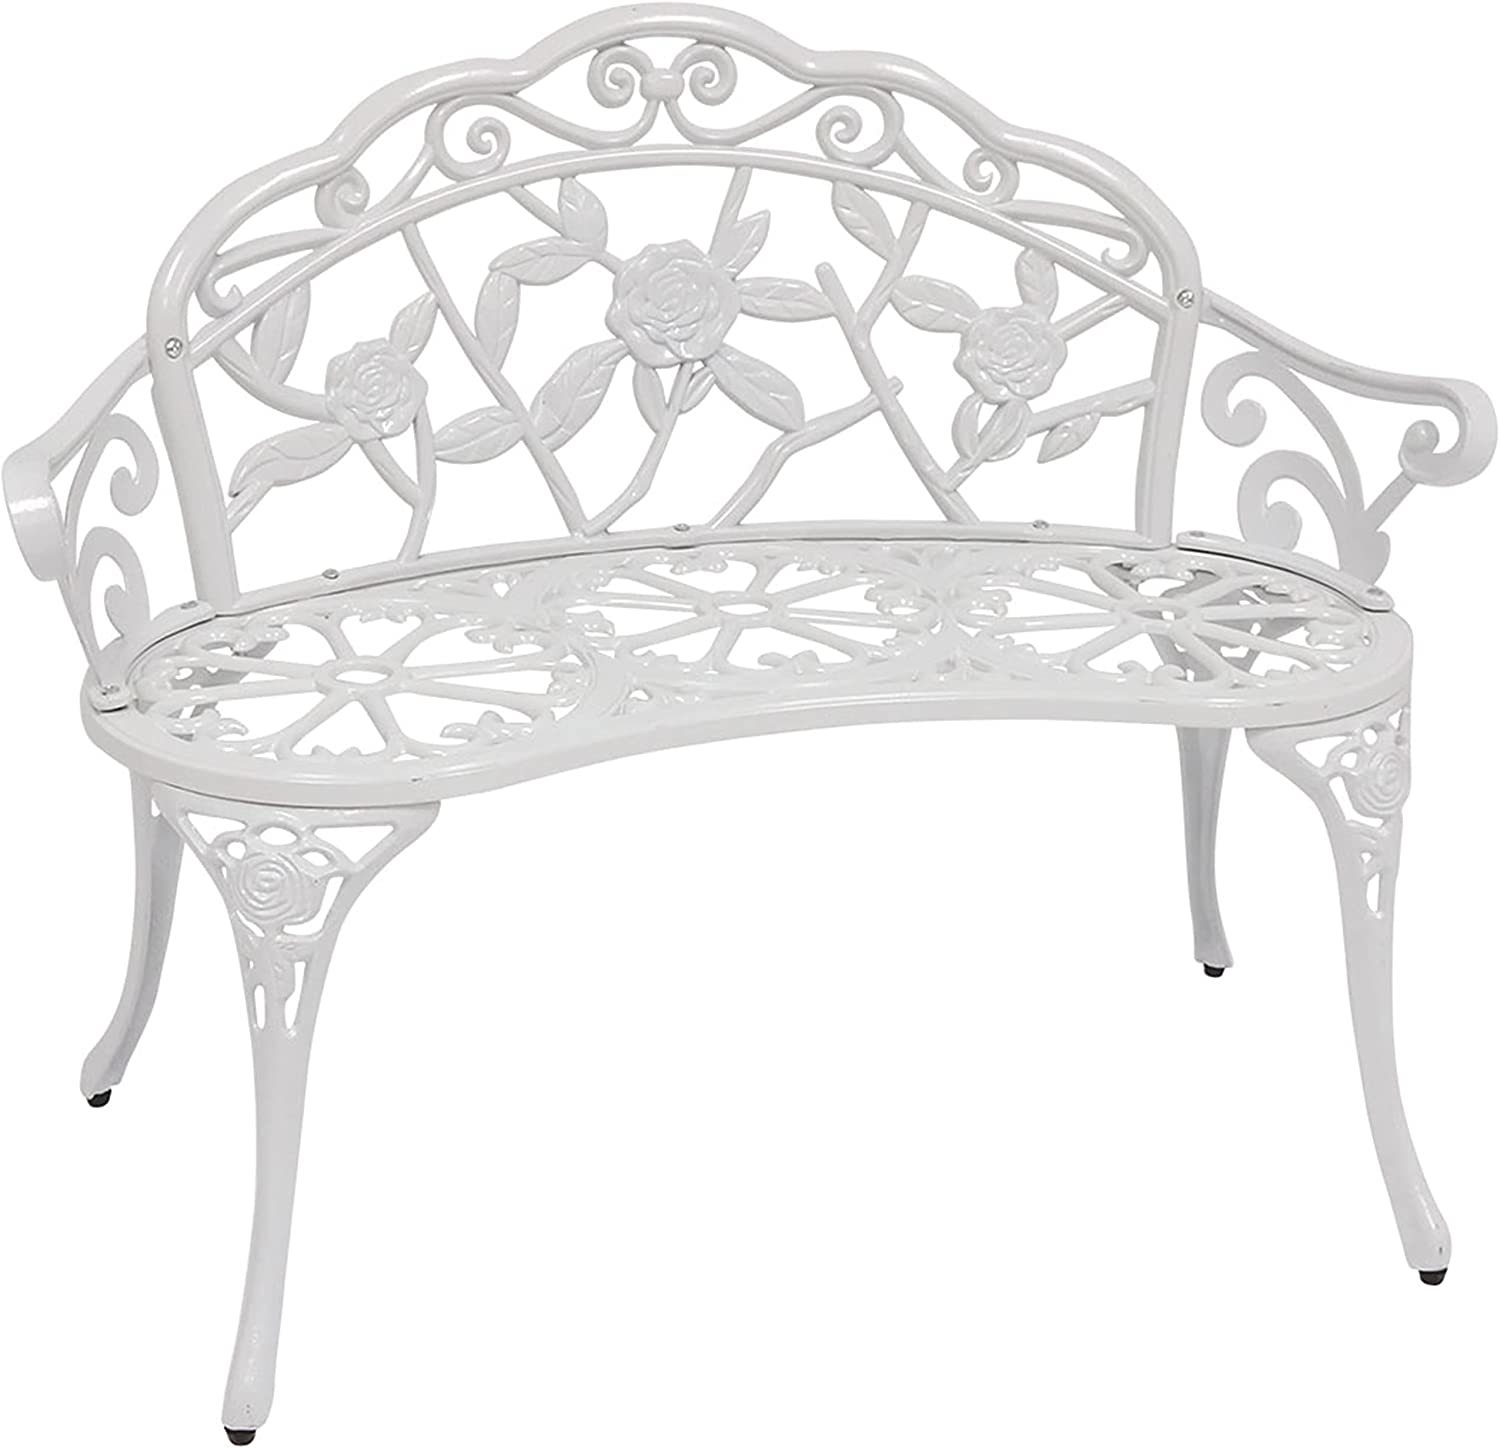 Primary image for Sunnydaze 2-Person Classic Rose Cast Aluminum White Outdoor Garden Bench